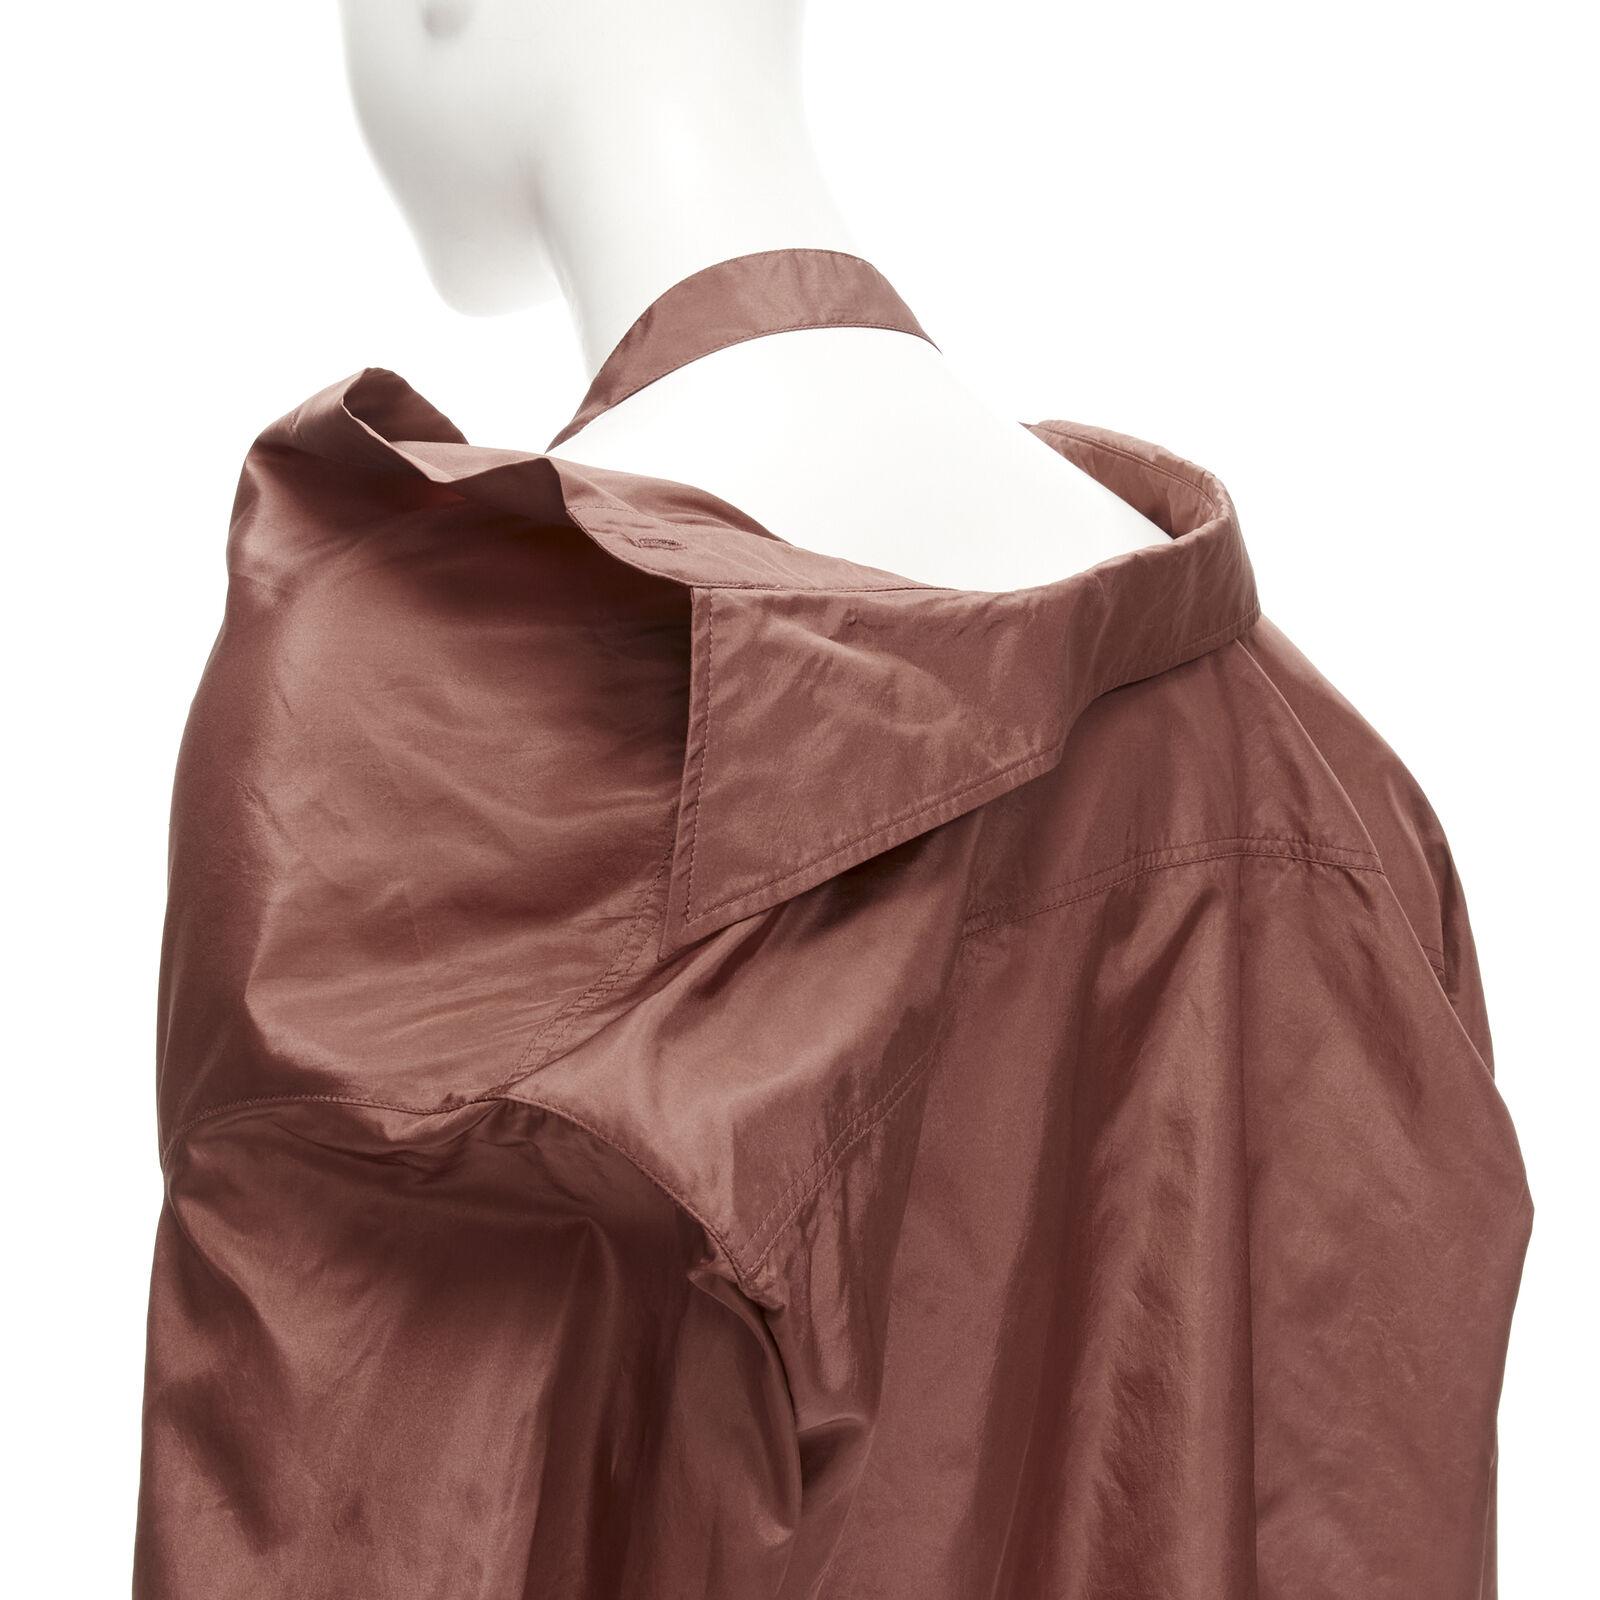 VALENTINO 2022 Runway brown silk taffeta wide collar neck tie shirt IT38 XS
Reference: AAWC/A00265
Brand: Valentino
Designer: Pier Paolo Piccioli
Collection: 2022 - Runway
Material: 100% Silk
Color: Brown
Pattern: Solid
Closure: Button
Made in: